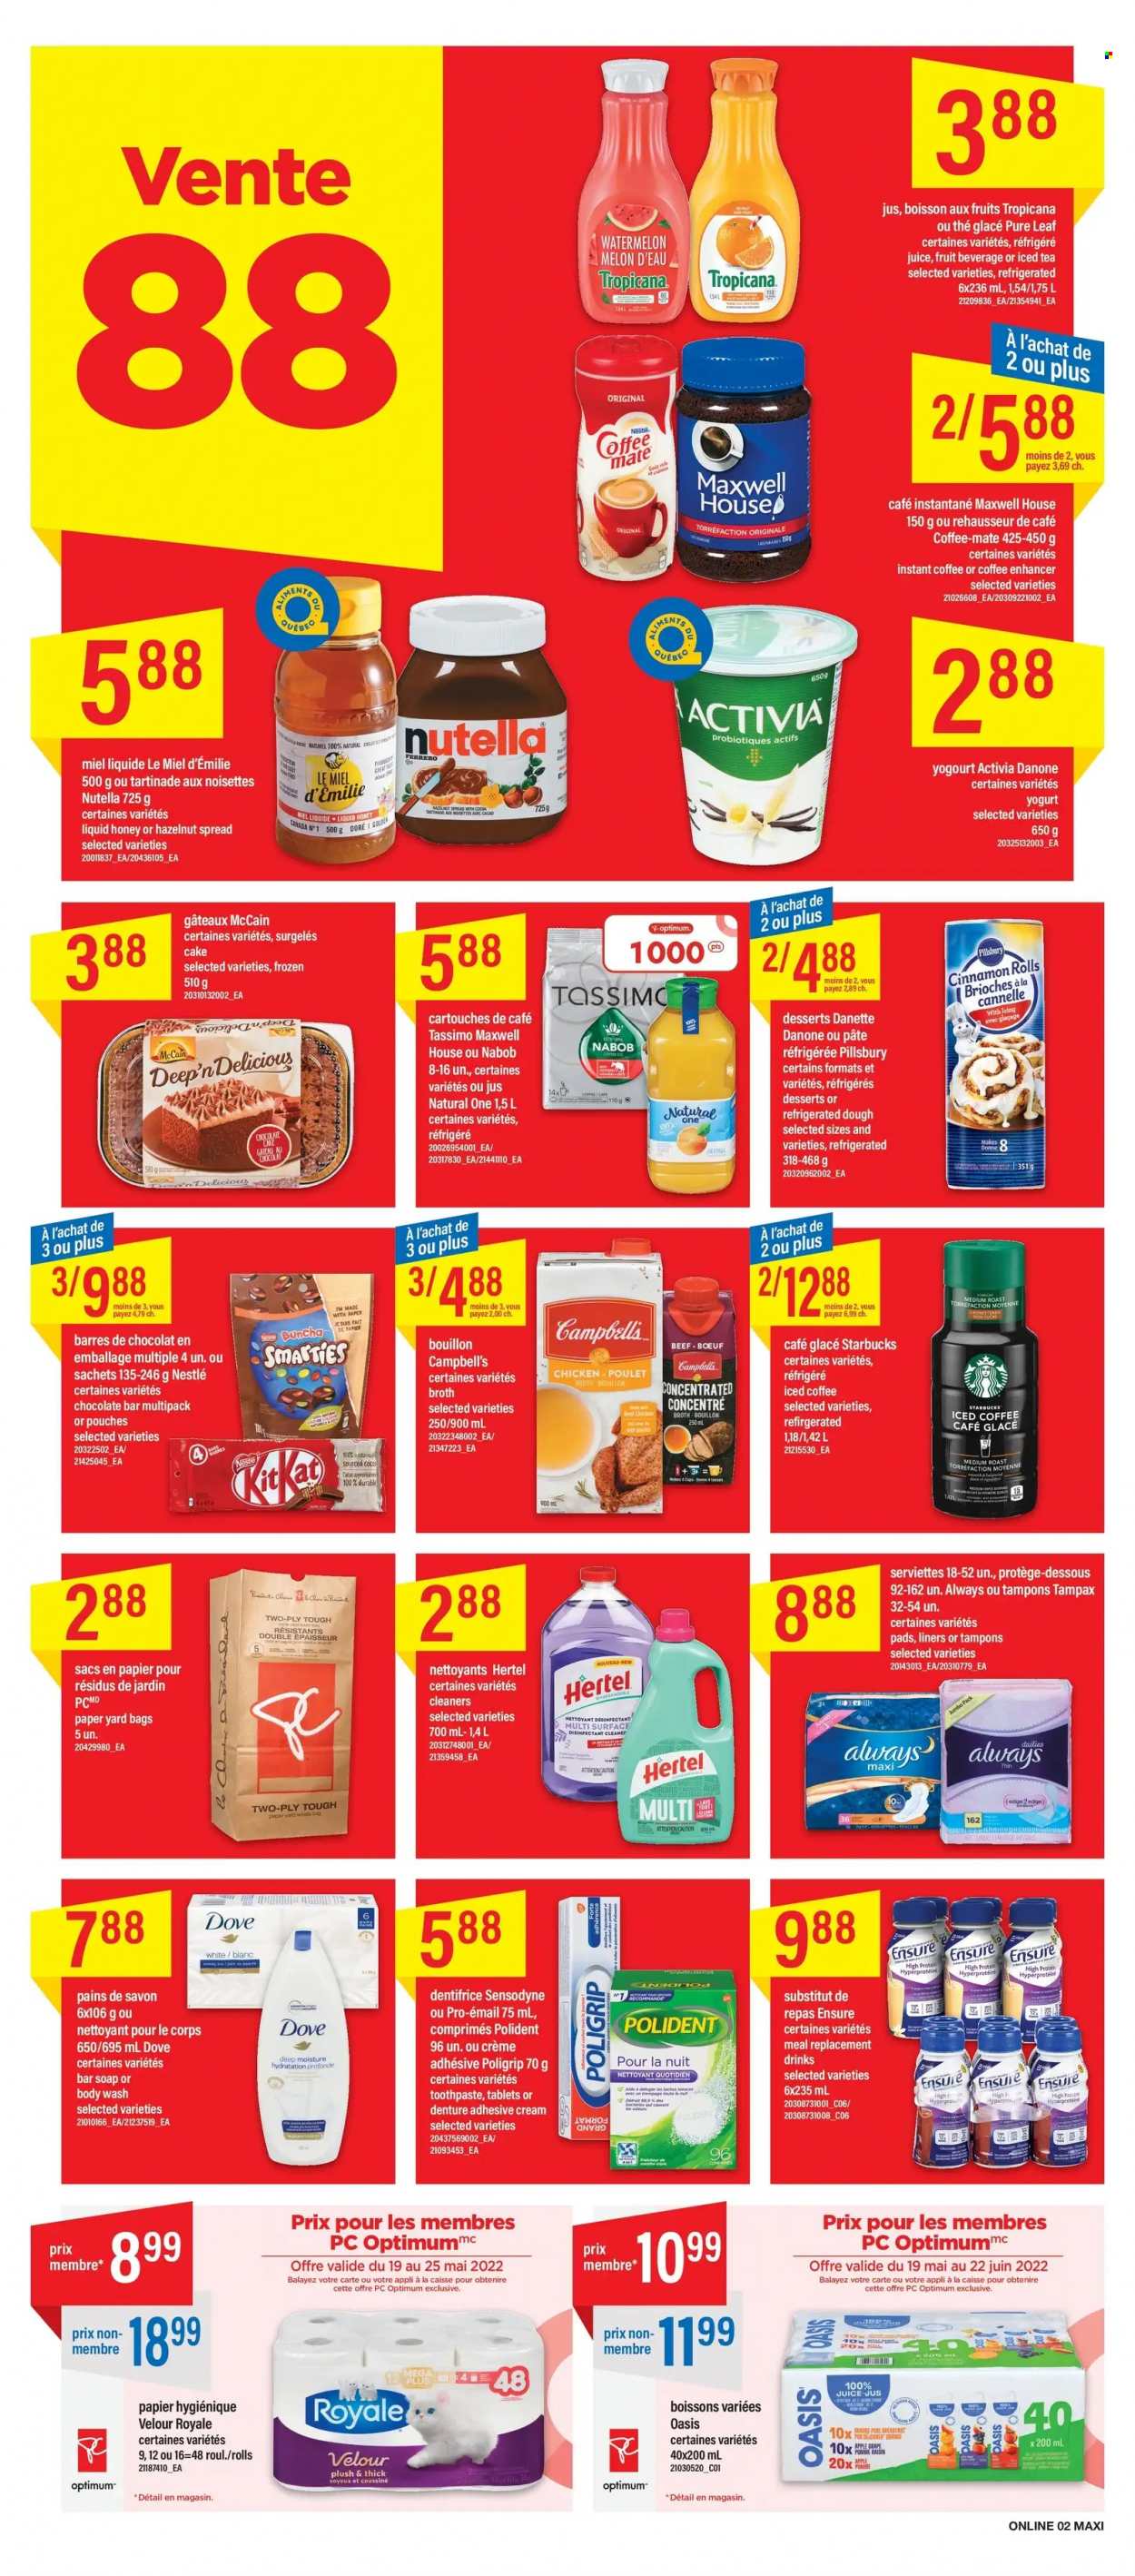 thumbnail - Maxi & Cie Flyer - May 19, 2022 - May 25, 2022 - Sales products - cake, cinnamon roll, watermelon, melons, Campbell's, Pillsbury, yoghurt, Activia, Coffee-Mate, McCain, chocolate bar, bouillon, broth, hazelnut spread, juice, ice tea, iced coffee, Maxwell House, Pure Leaf, instant coffee, Starbucks, body wash, soap bar, soap, toothpaste, Polident, tampons, Yard, Dove, Nestlé, Tampax, Nutella, Danone, Sensodyne, oranges, desinfection. Page 7.